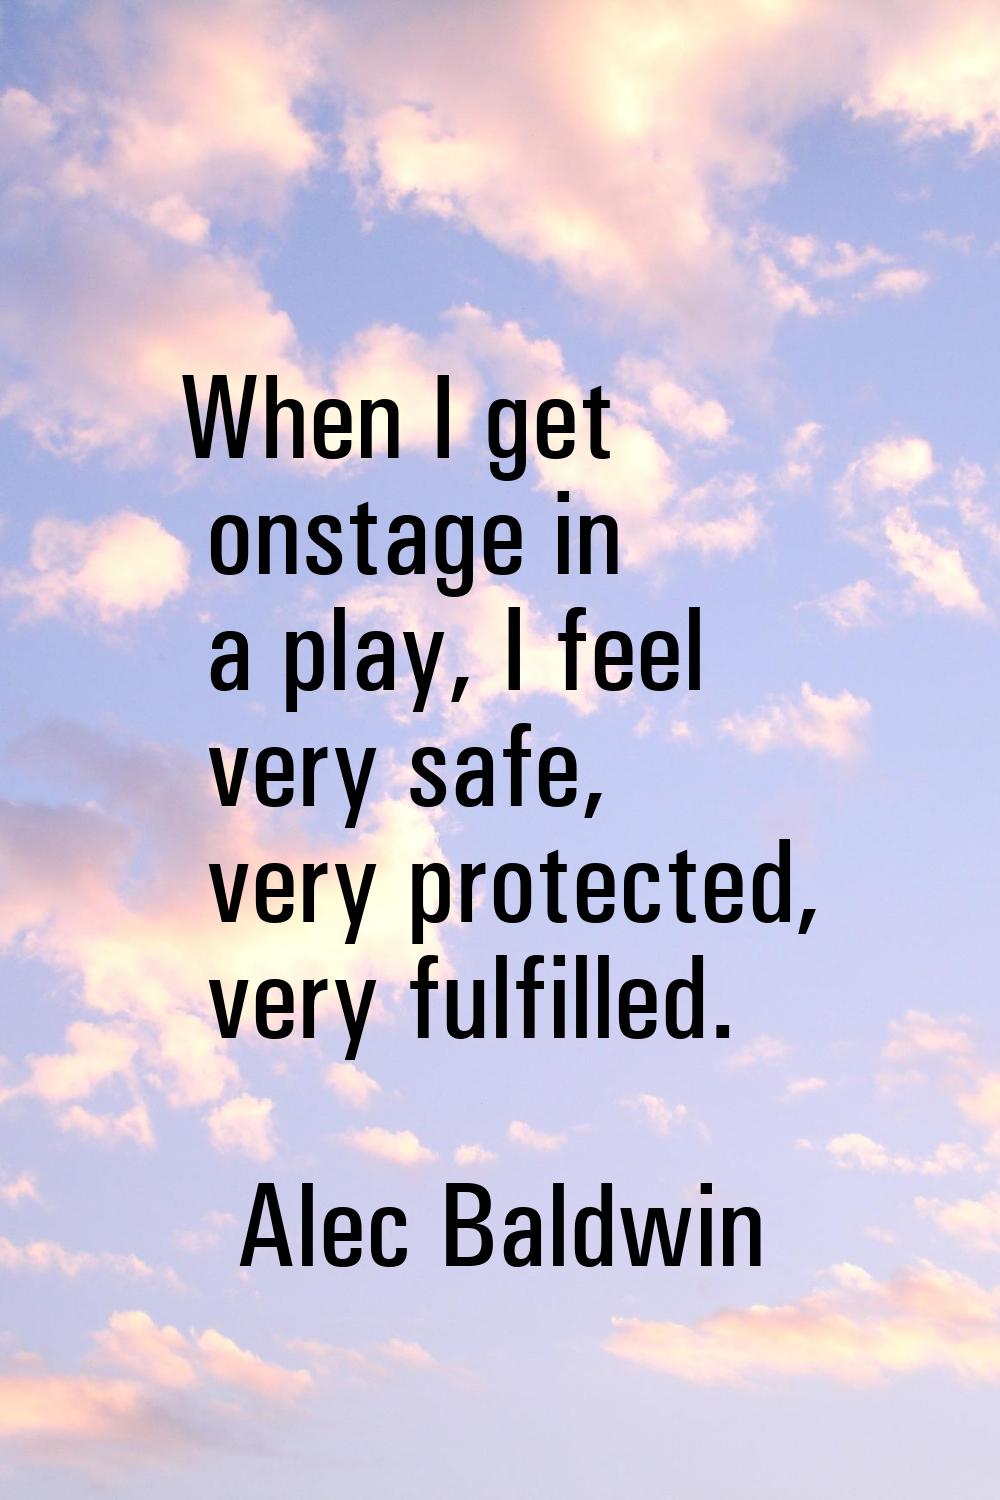 When I get onstage in a play, I feel very safe, very protected, very fulfilled.